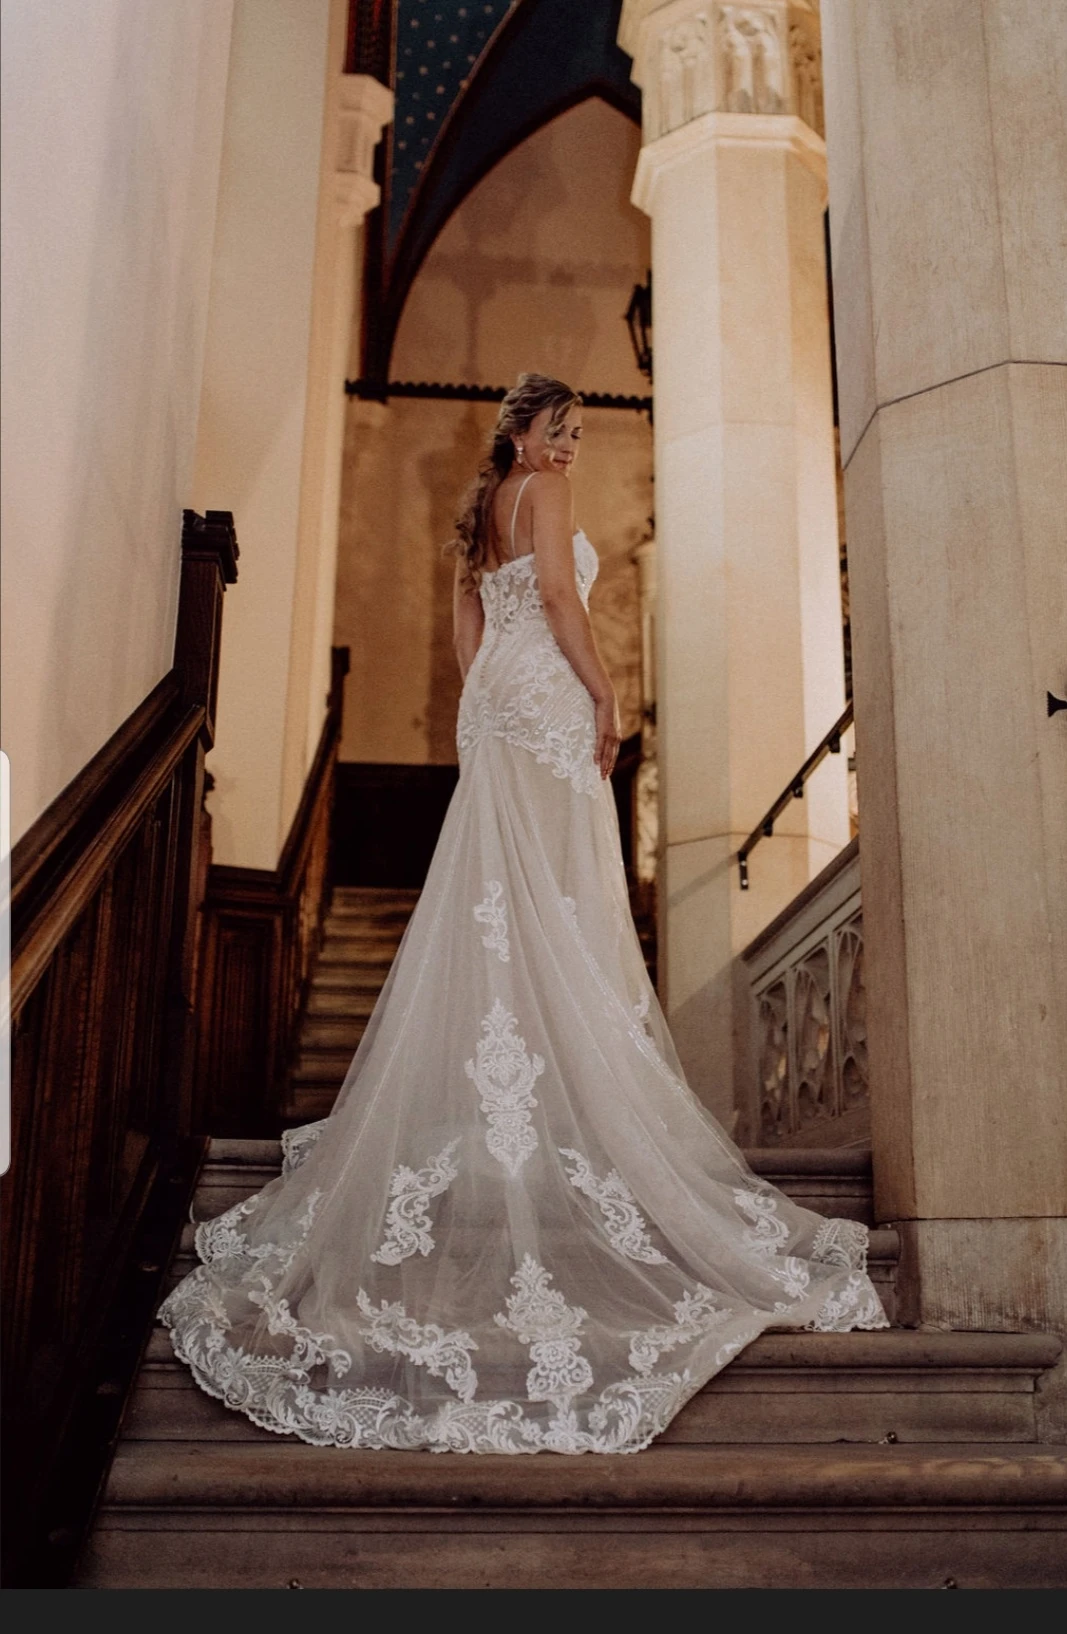 True Bride Alison walking up the stairs at the Marienburg Castle in Germany, wearing her Essense of Australia wedding dress, style D2819